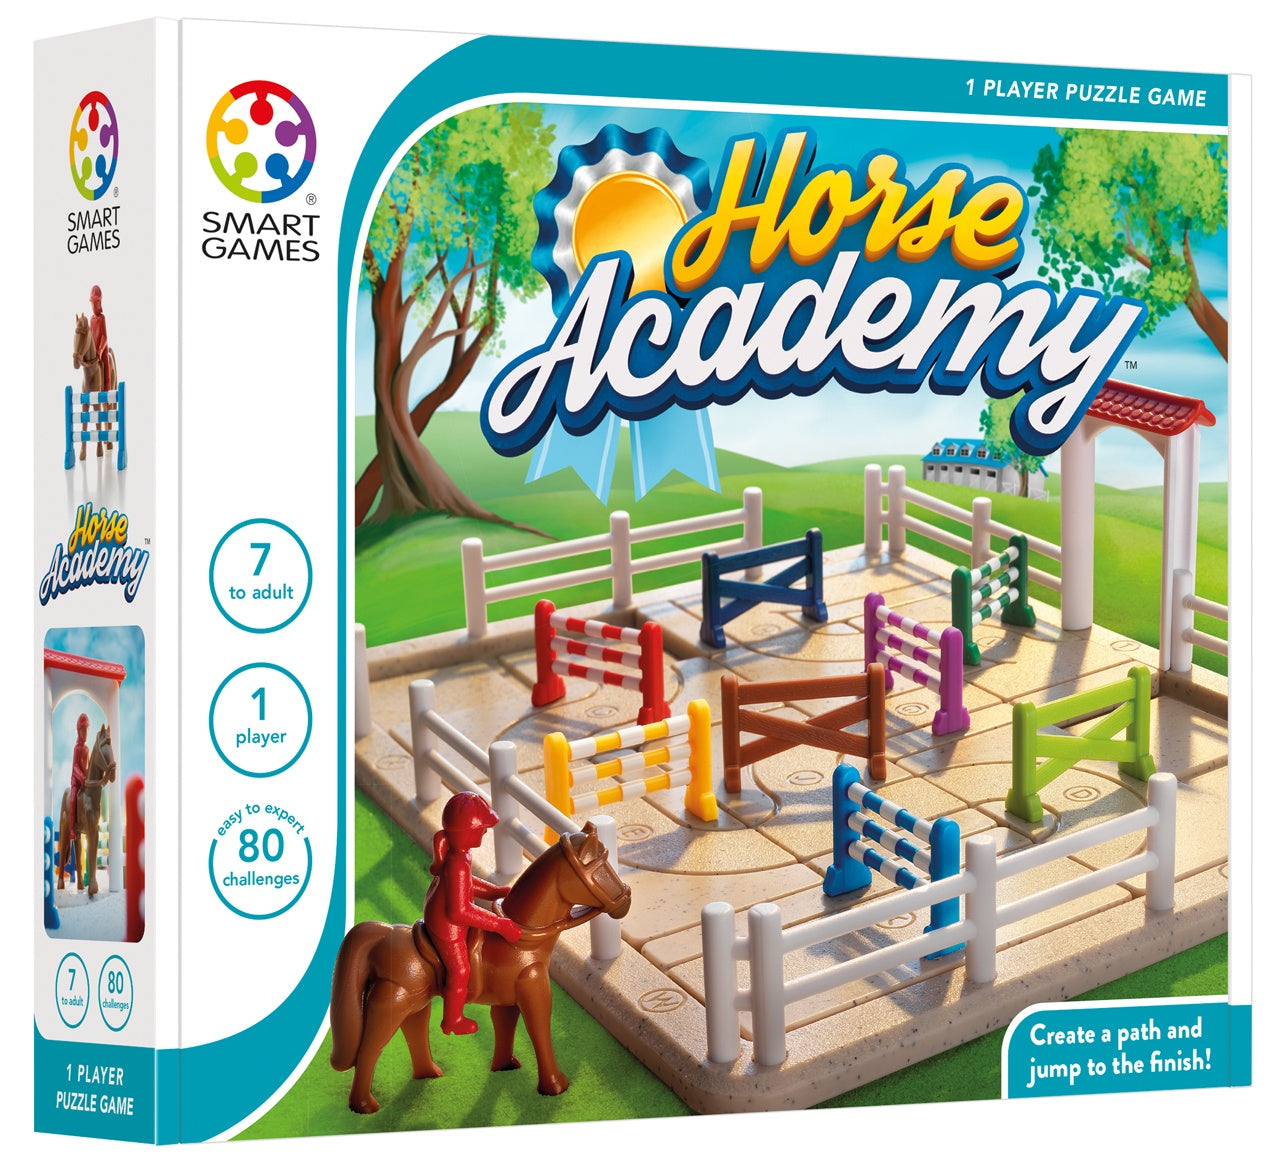 SMART GAMES - Horse Academy - Logical Processing - Single Player